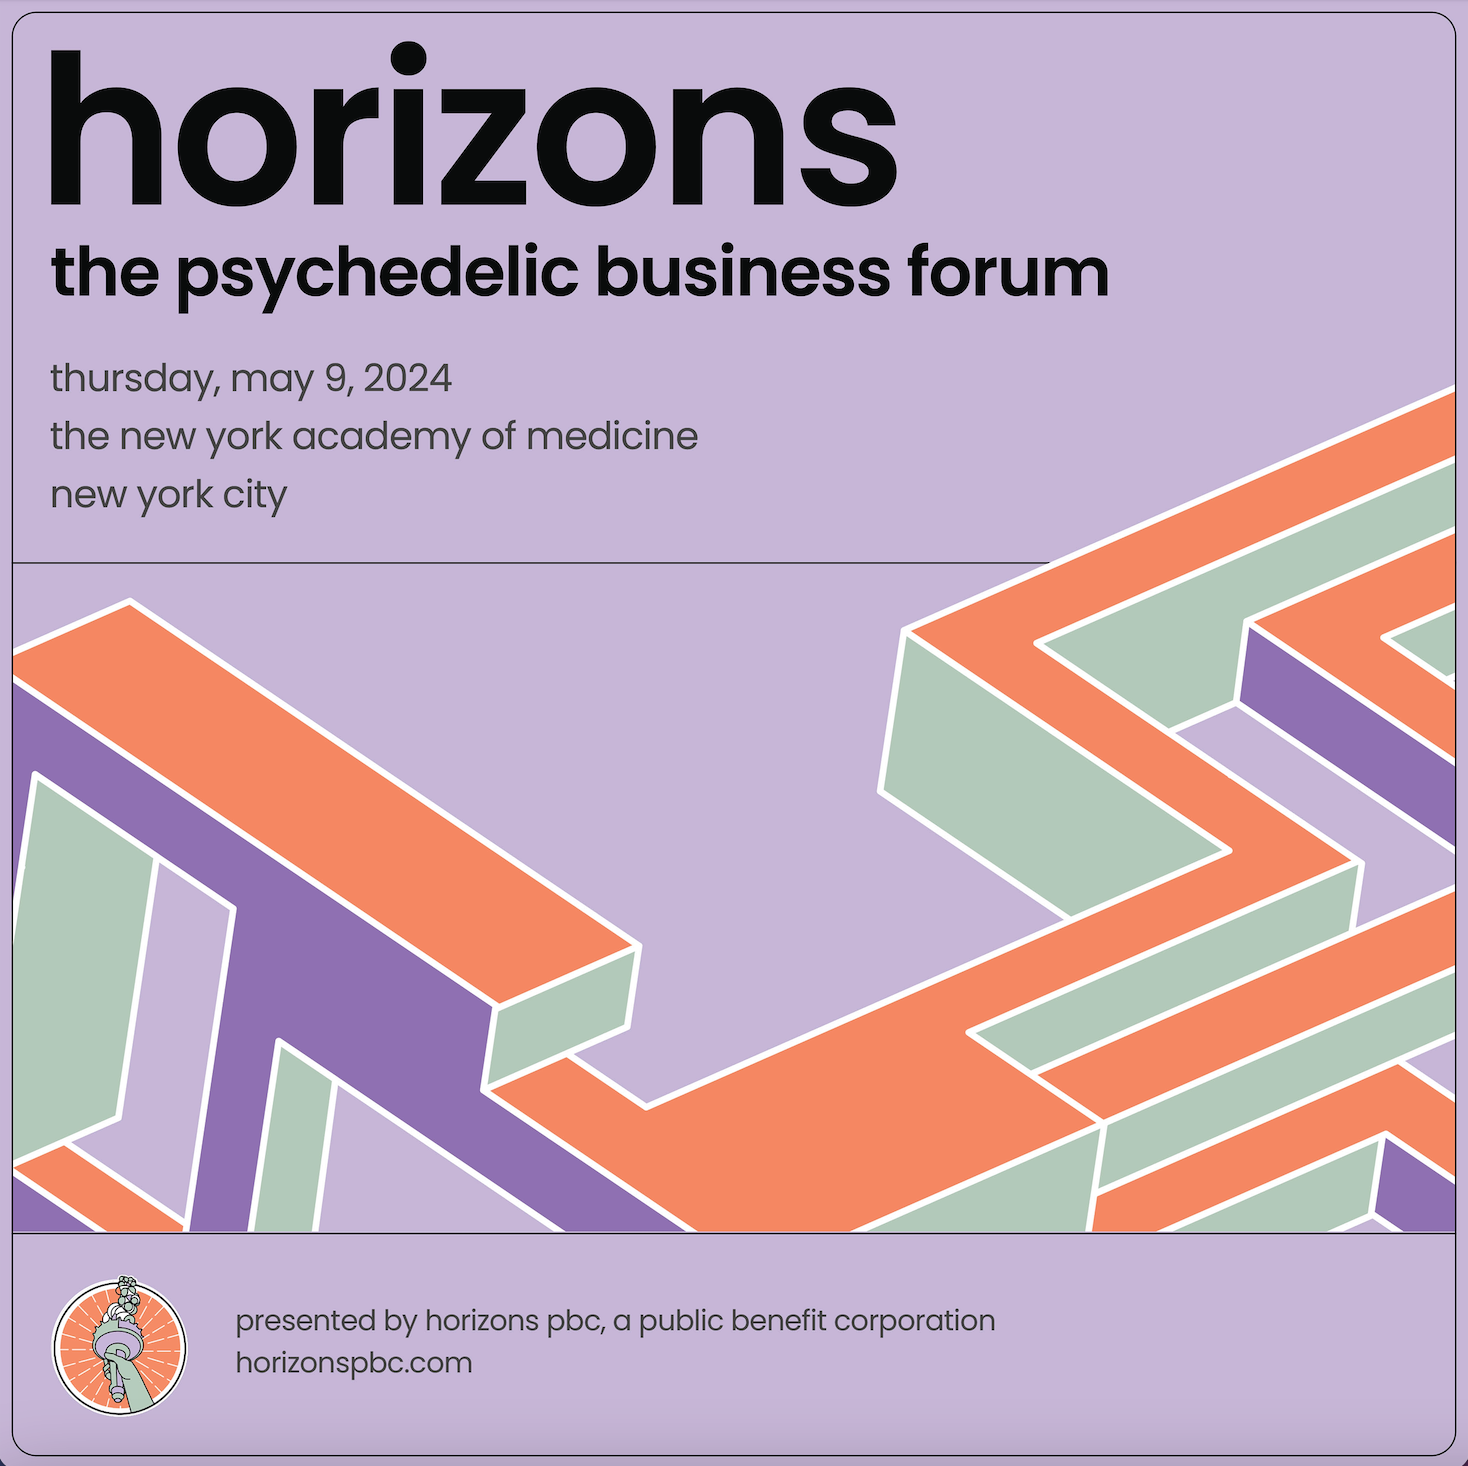 A poster for horizons the psychedelic business forum